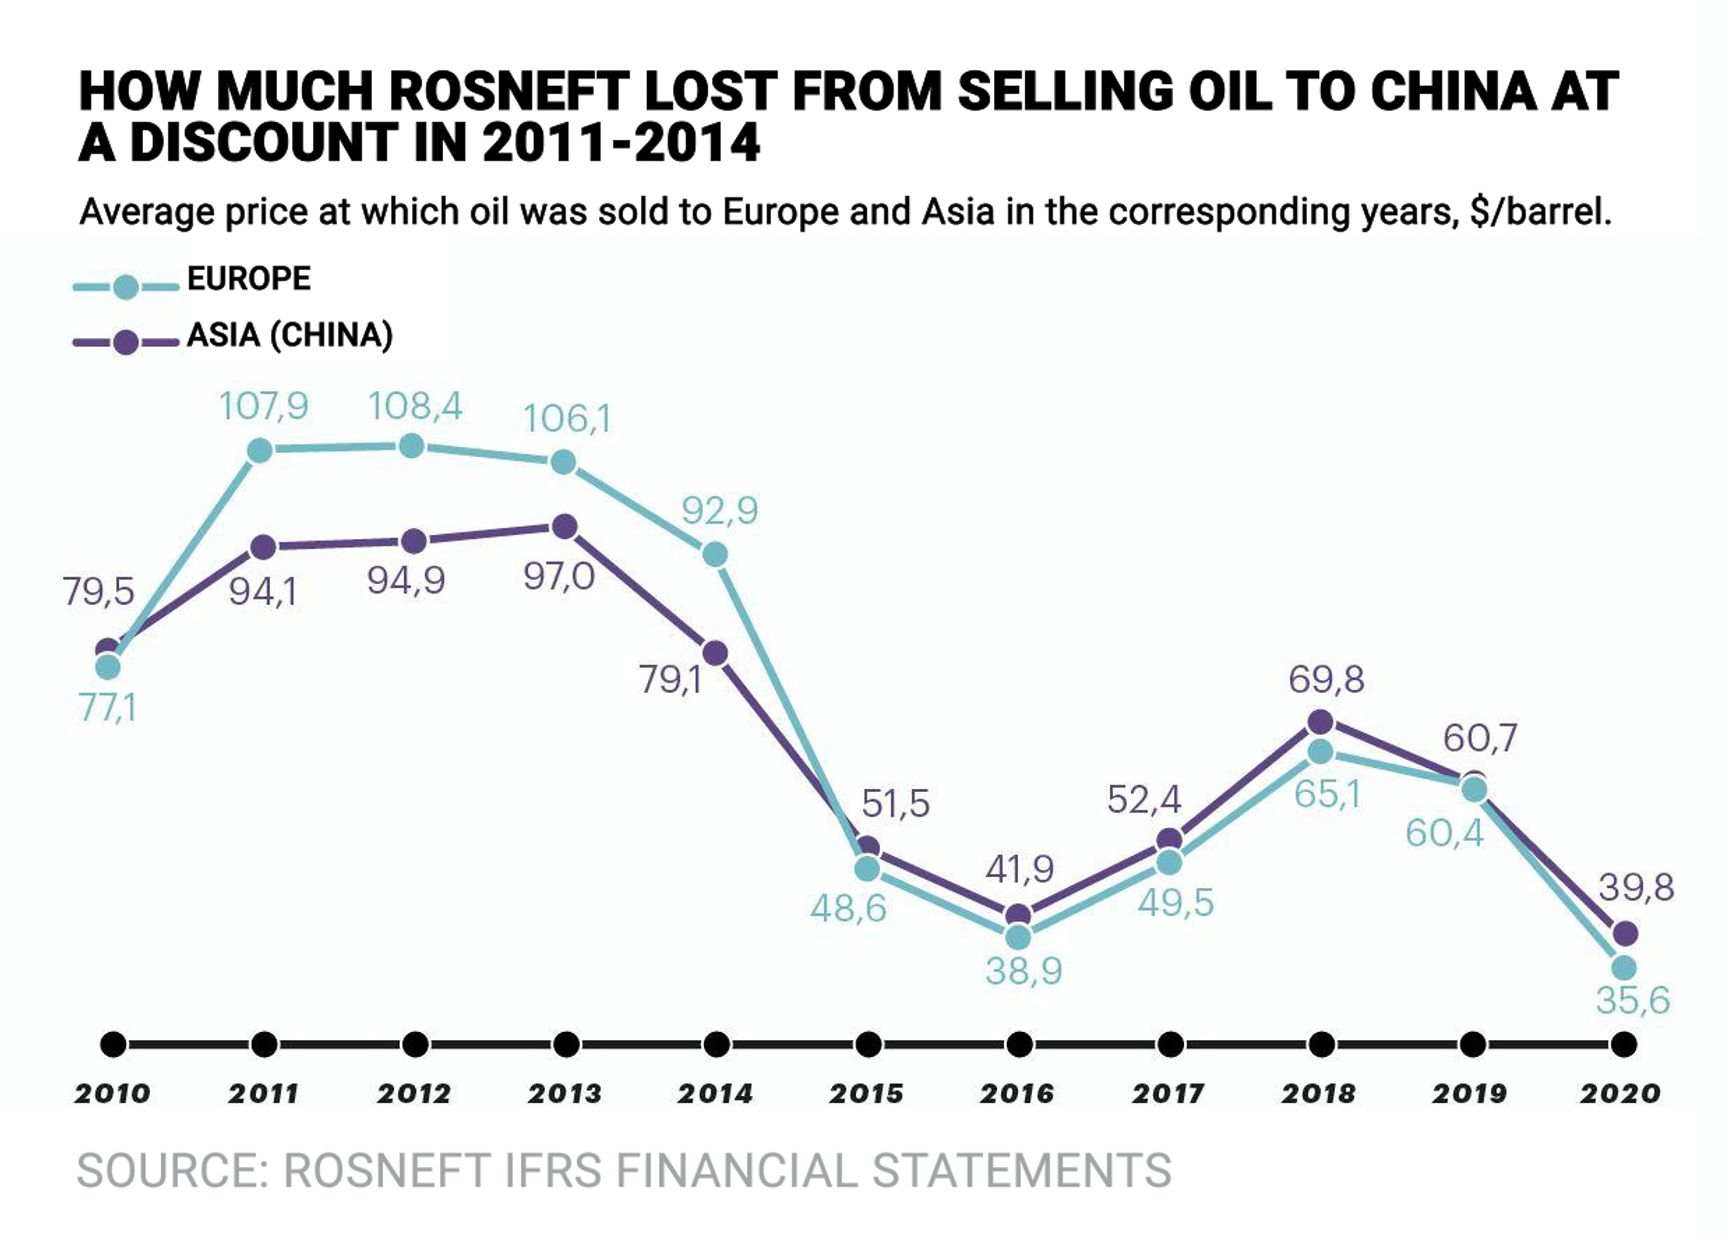 Average price at which oil was sold to Europe and Asia in the corresponding years, $/barrel